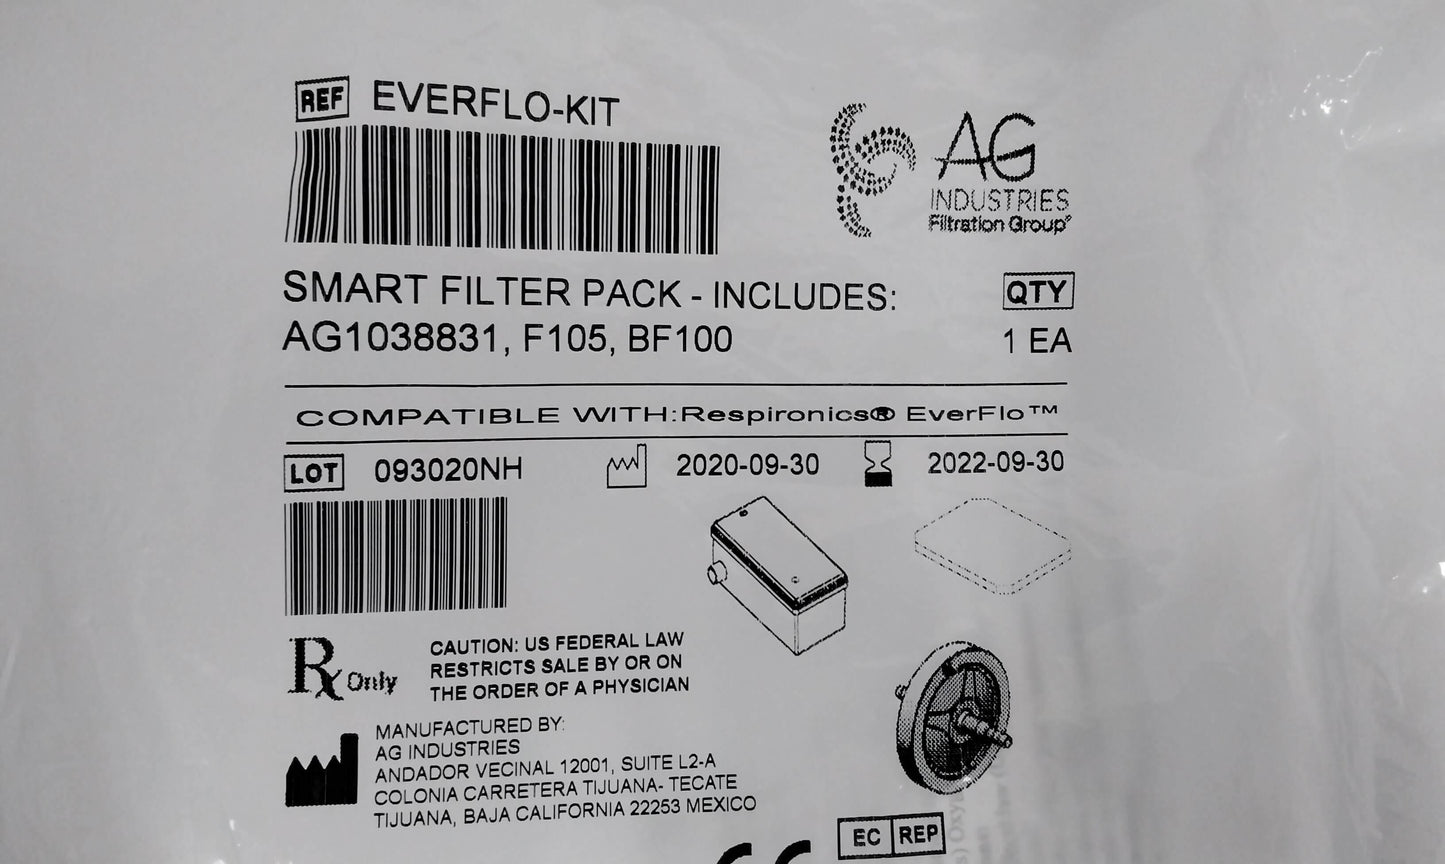 NEW AG Industries EverFlo Smart Filter Pack EverFlo-Kit with Free Shipping - MBR Medicals